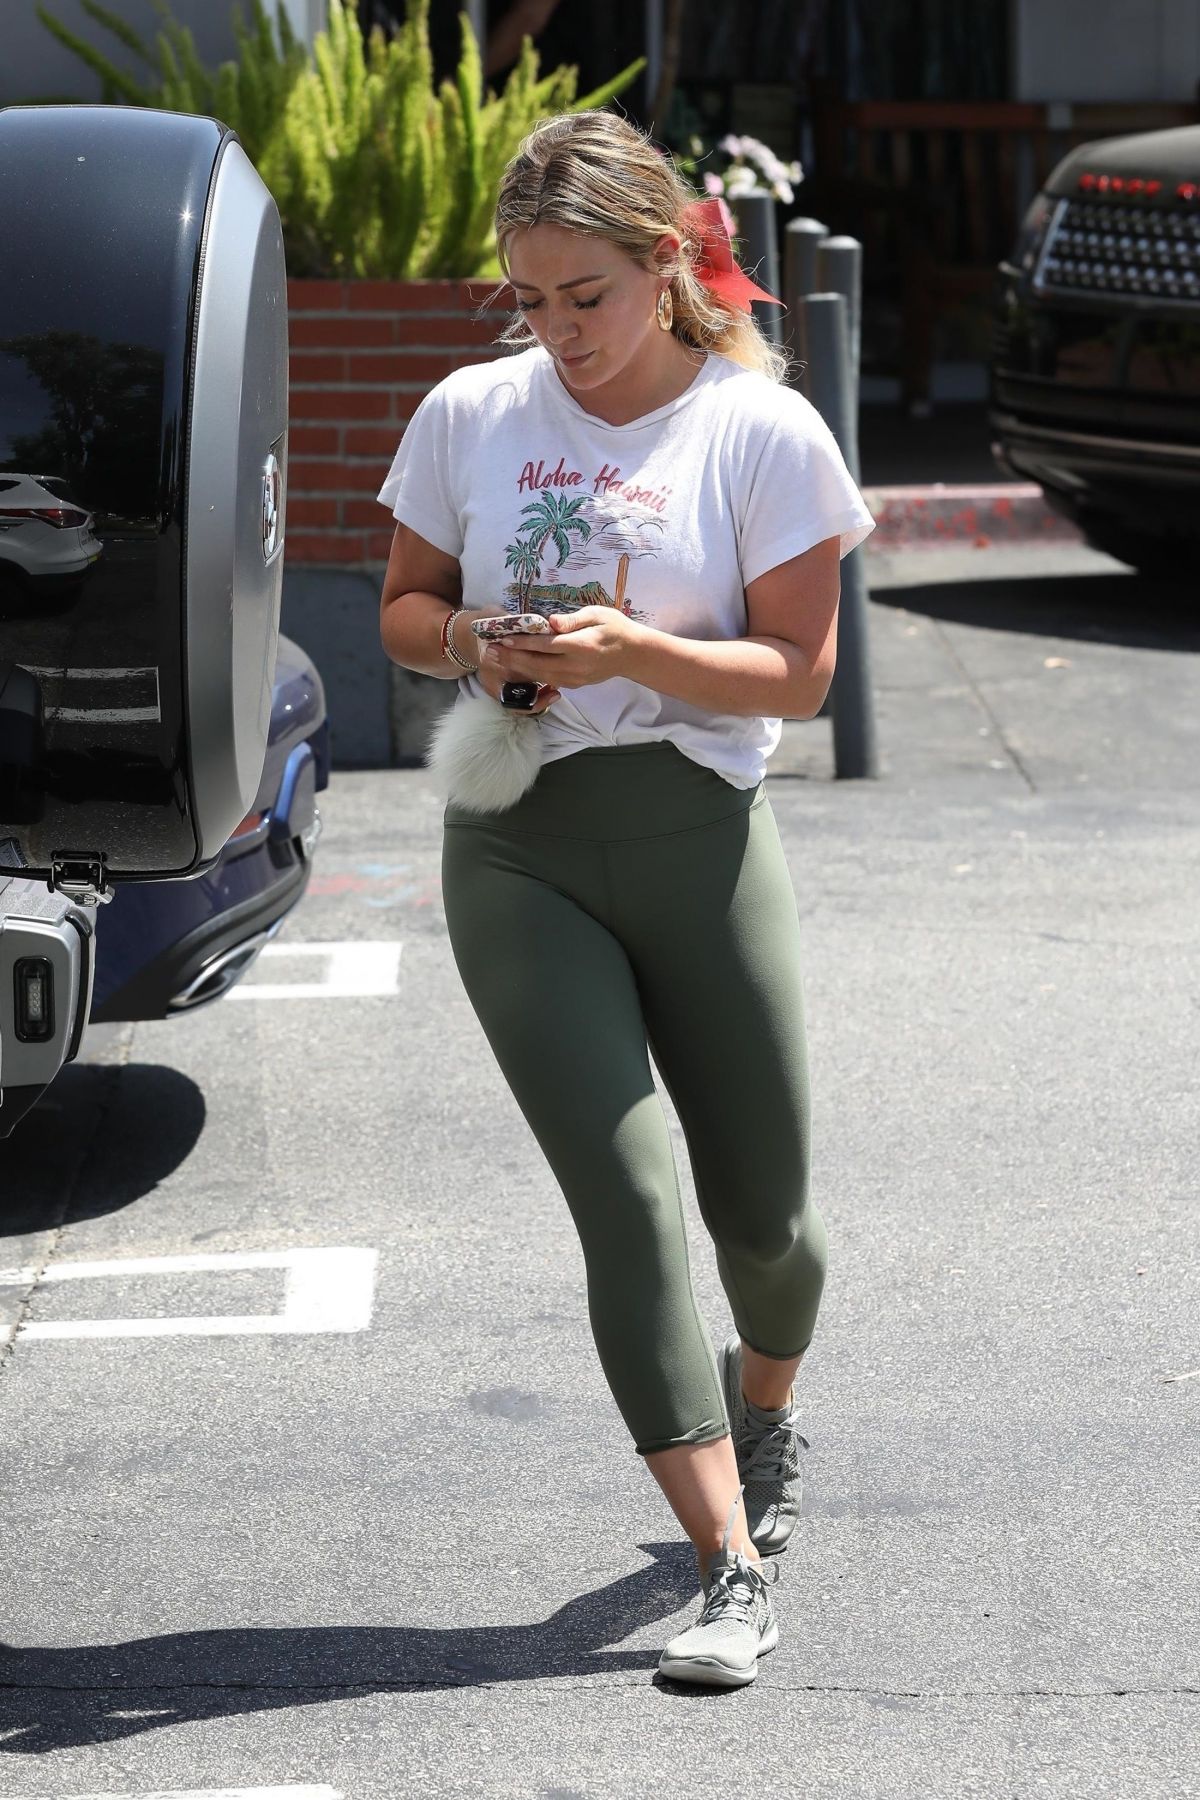 HILARY DUFF in Leggings Out Shopping in Los Angeles 08/21/2019.